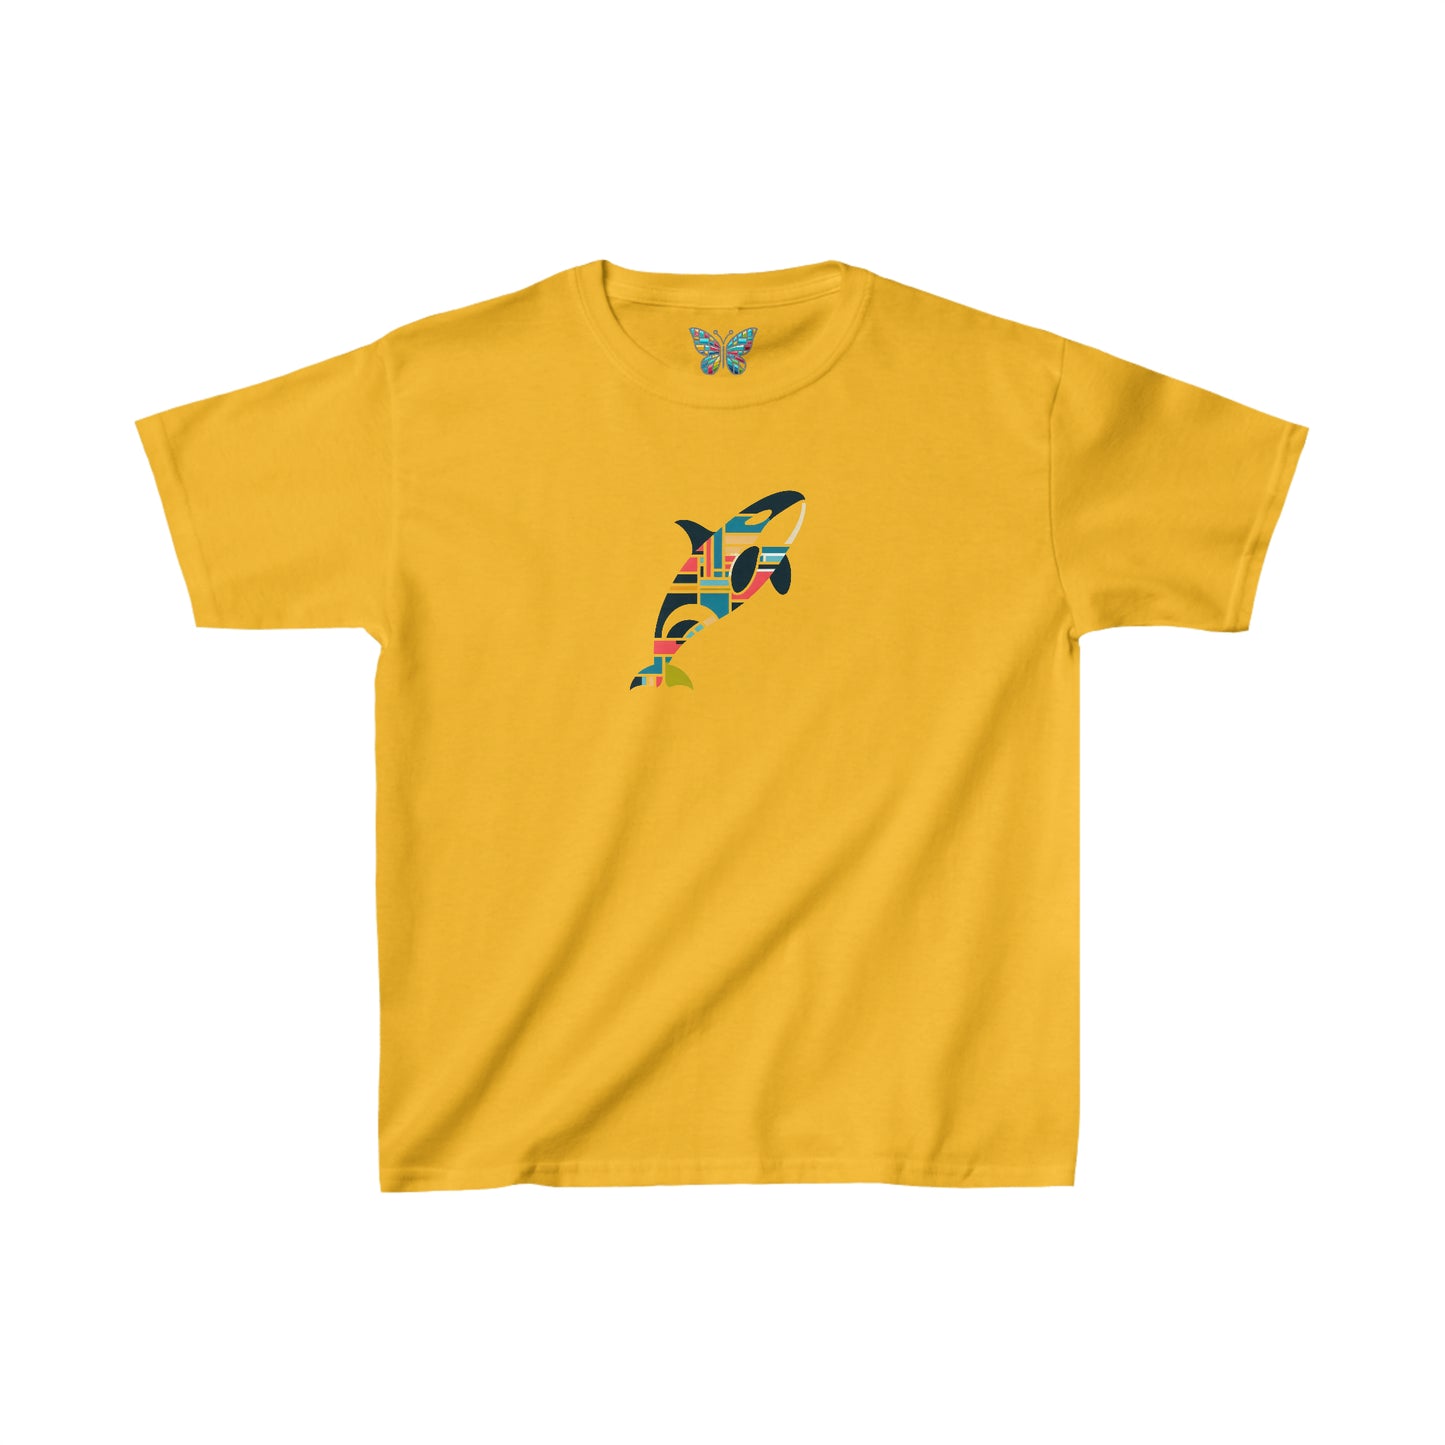 Orca Whimbience - Youth - Snazzle Tee